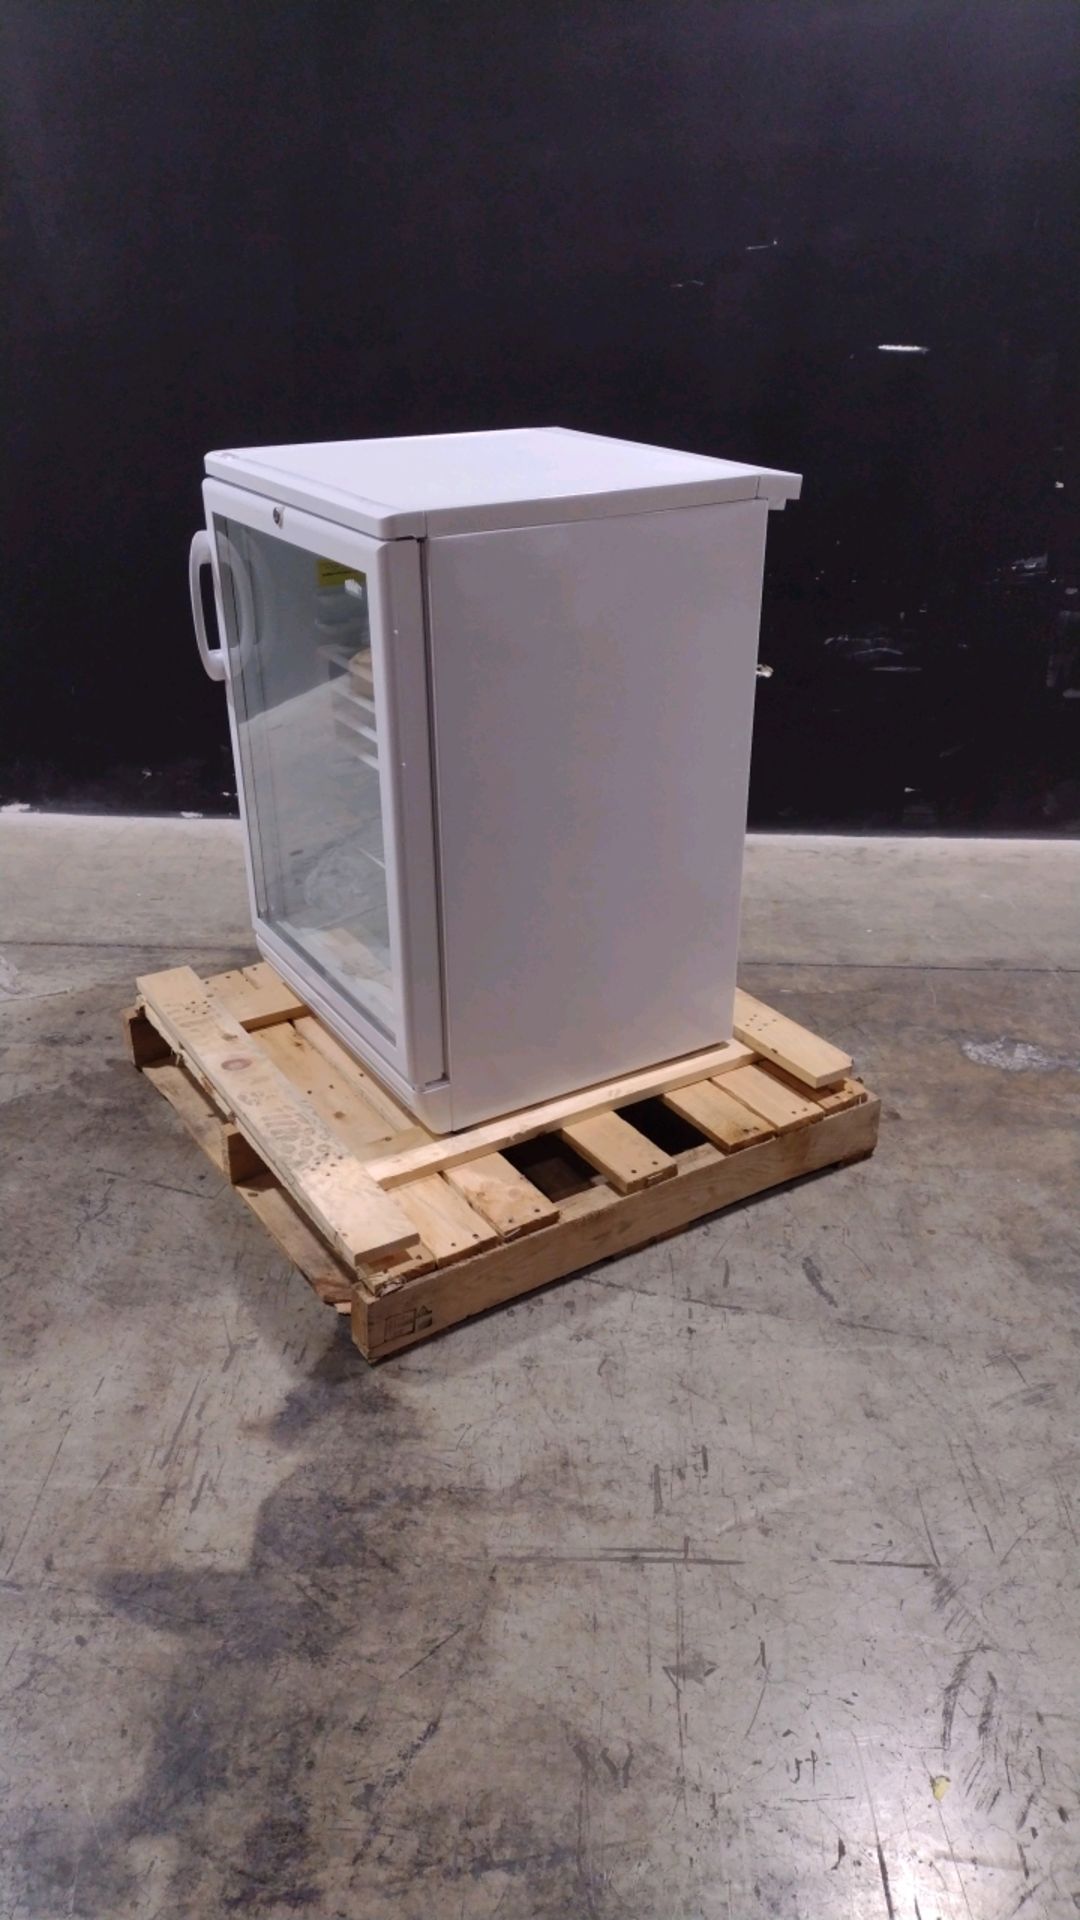 SUMMIT SCR600GL FRIDGE (LOCATED AT 3325 MOUNT PROSPECT ROAD, FRANKLIN PARK, IL, 60131) - Image 2 of 4